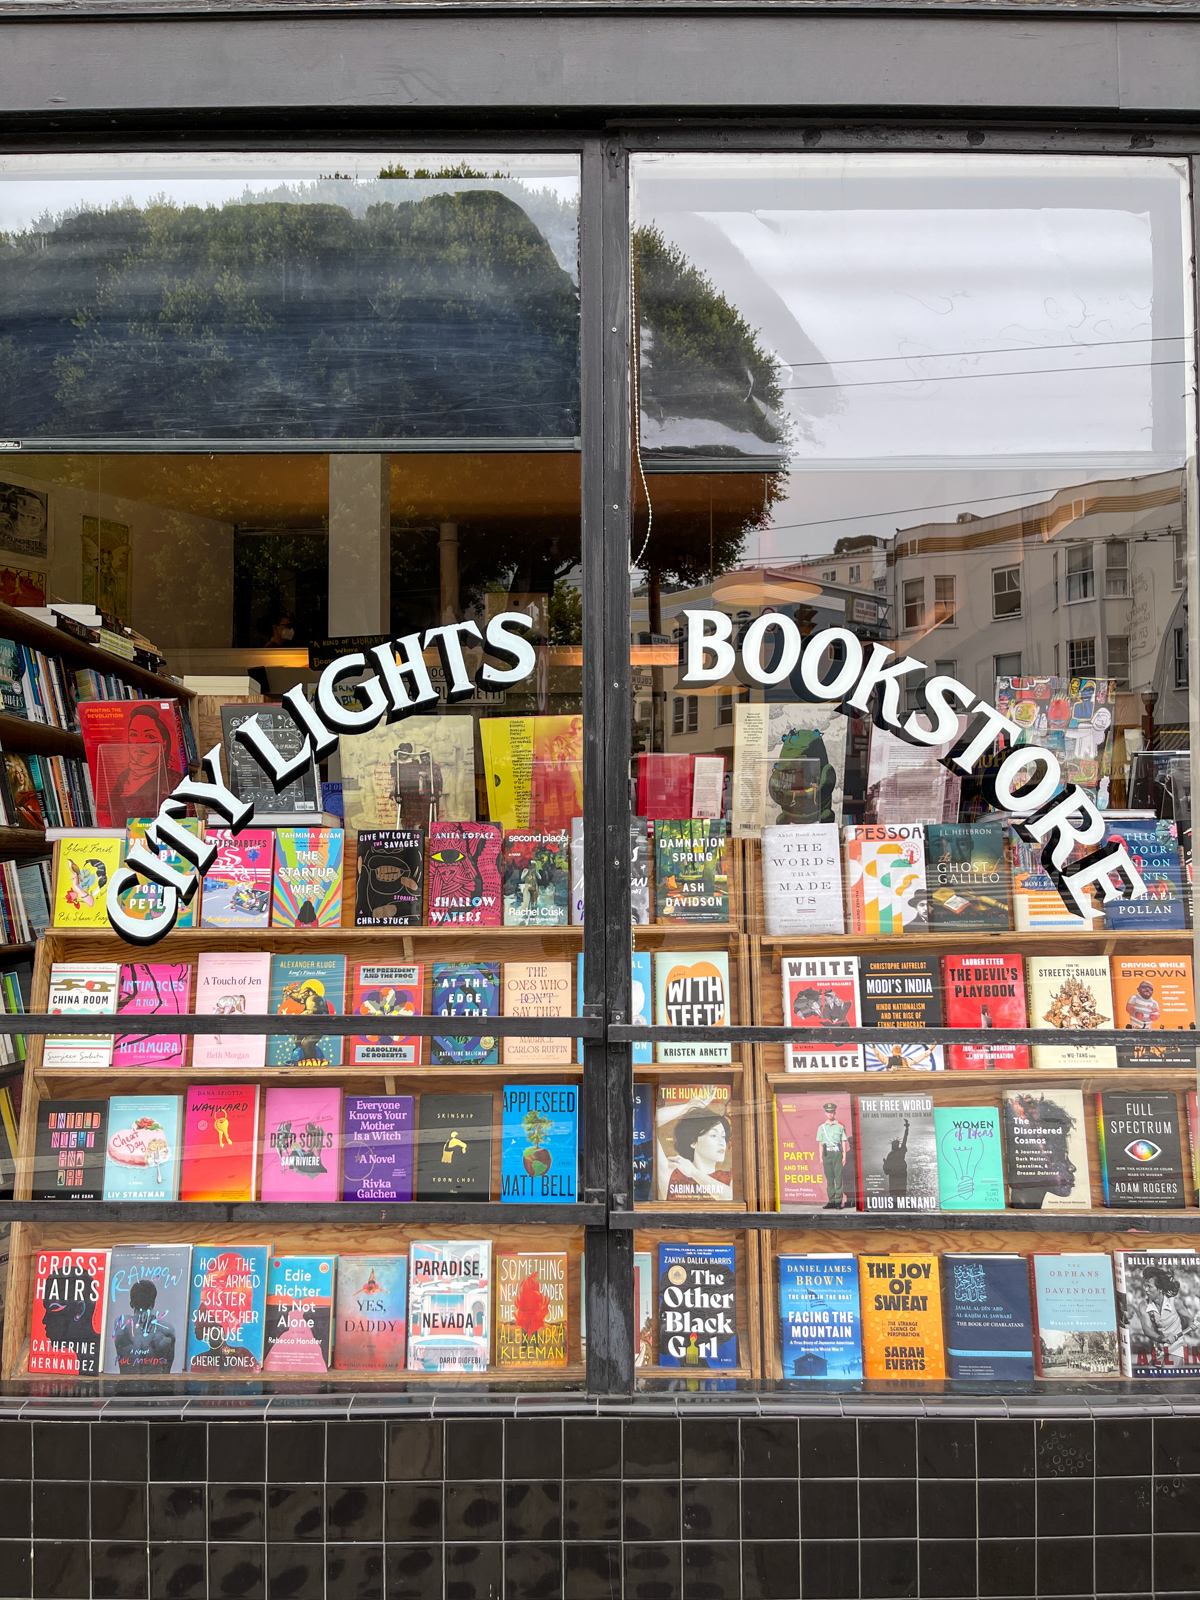 Visiting the historic City Lights Bookstore is one of many free things to do in San Francisco, California.